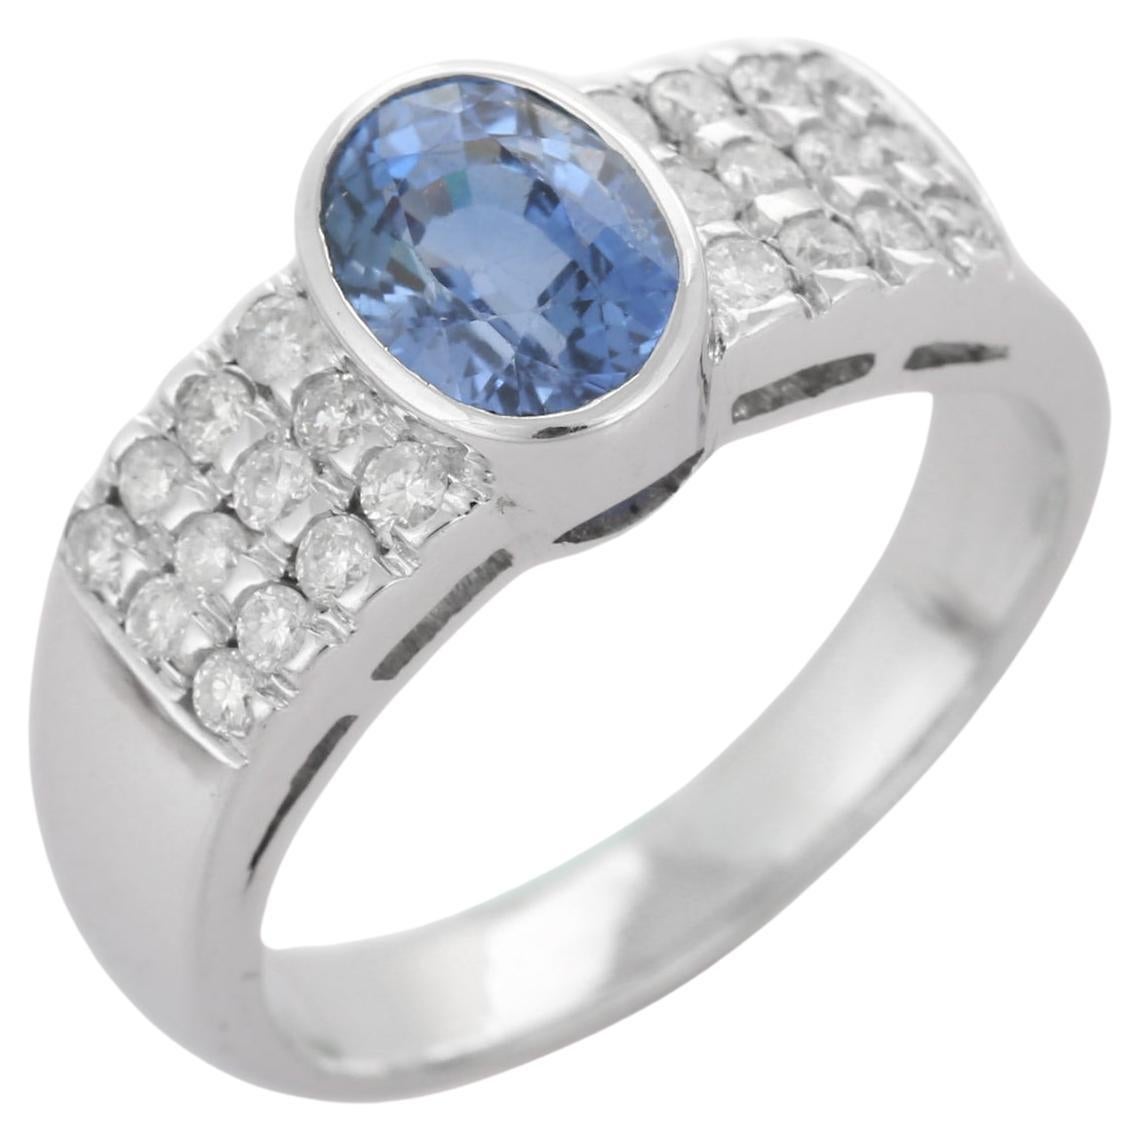 For Sale:  18 Karat White Gold 2.05 ct Oval Blue Sapphire and Diamond Engagement Ring